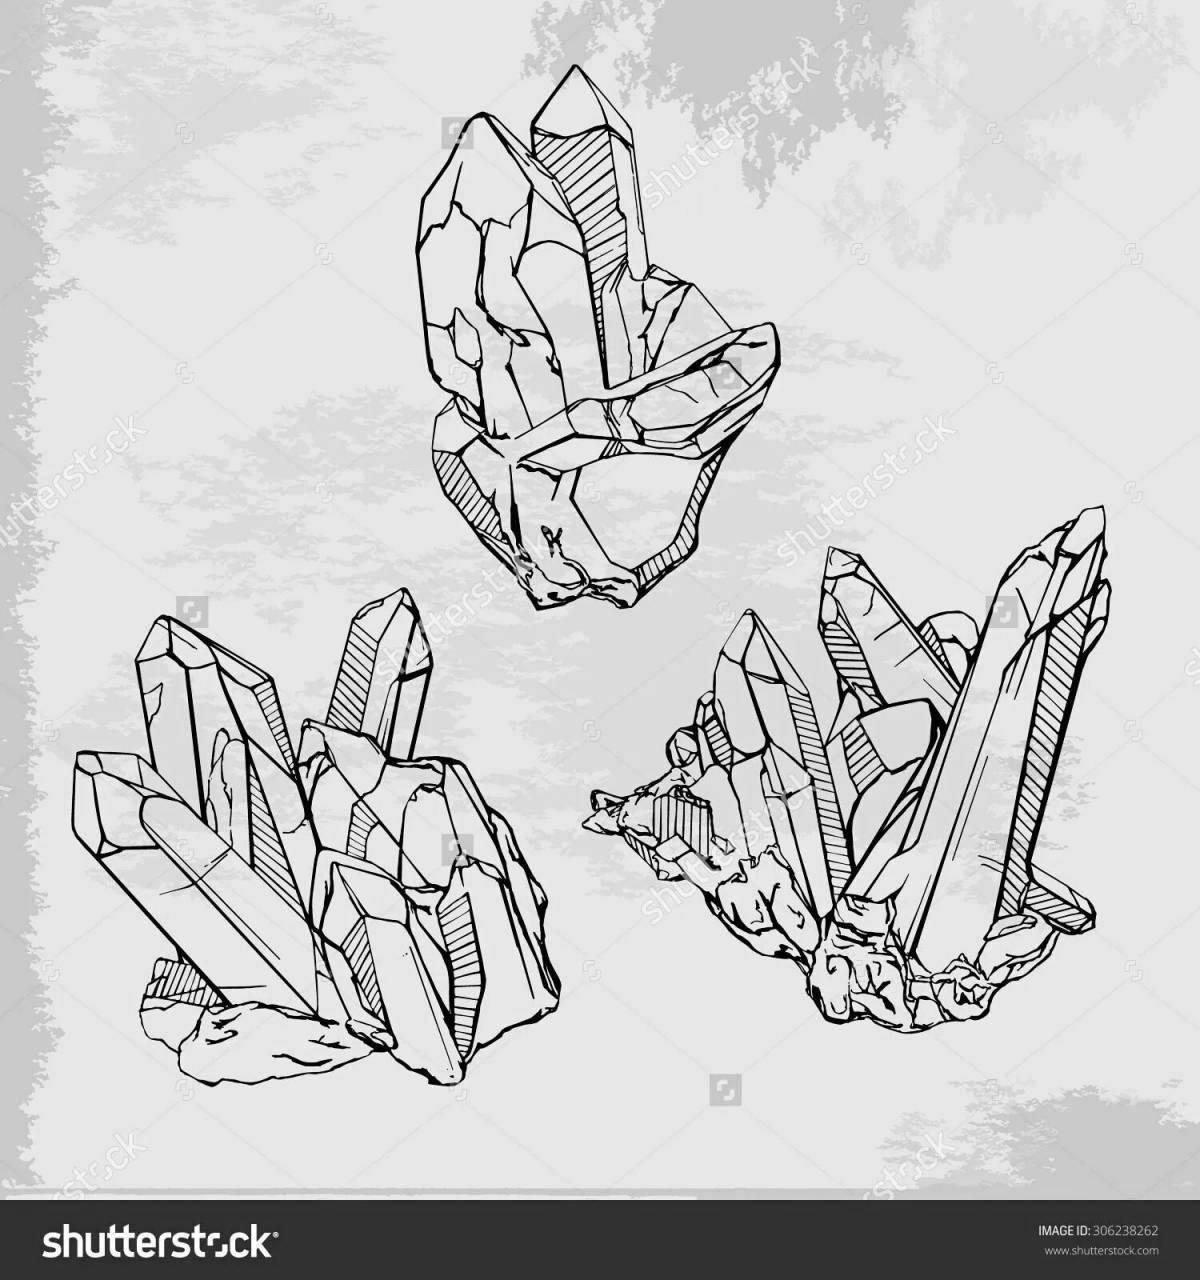 Intriguing coloring book minerals for kids